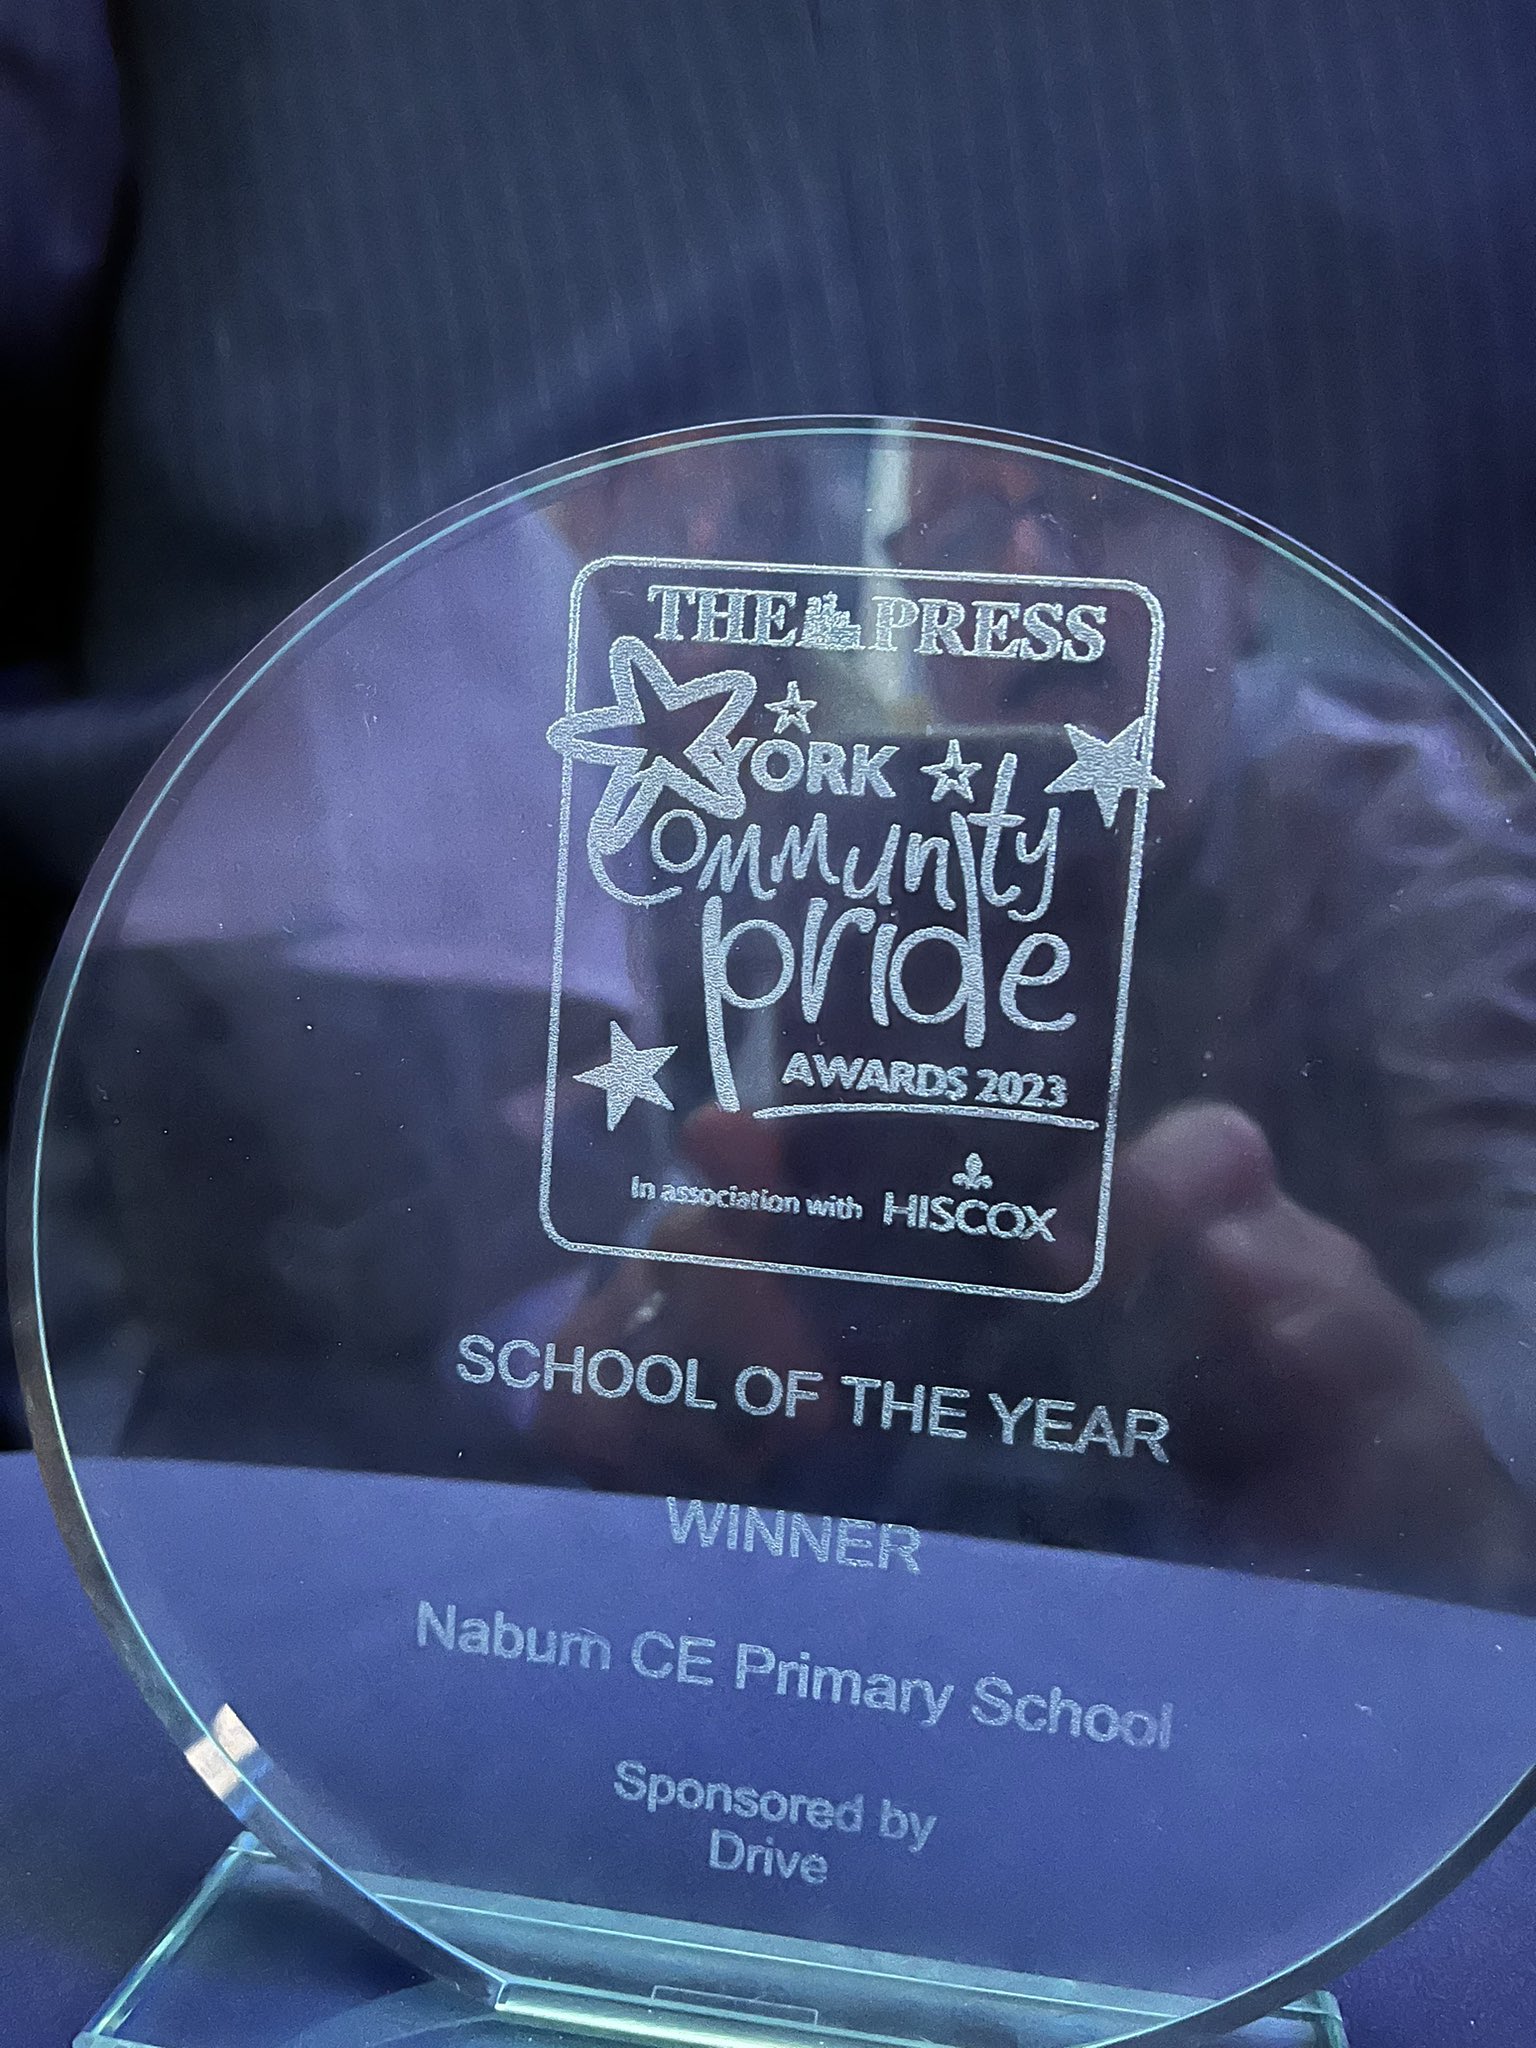 Glass award for the Press York Community Pride awards 2023, naming Naburn CE Primary School as the winner of the school of the year category.